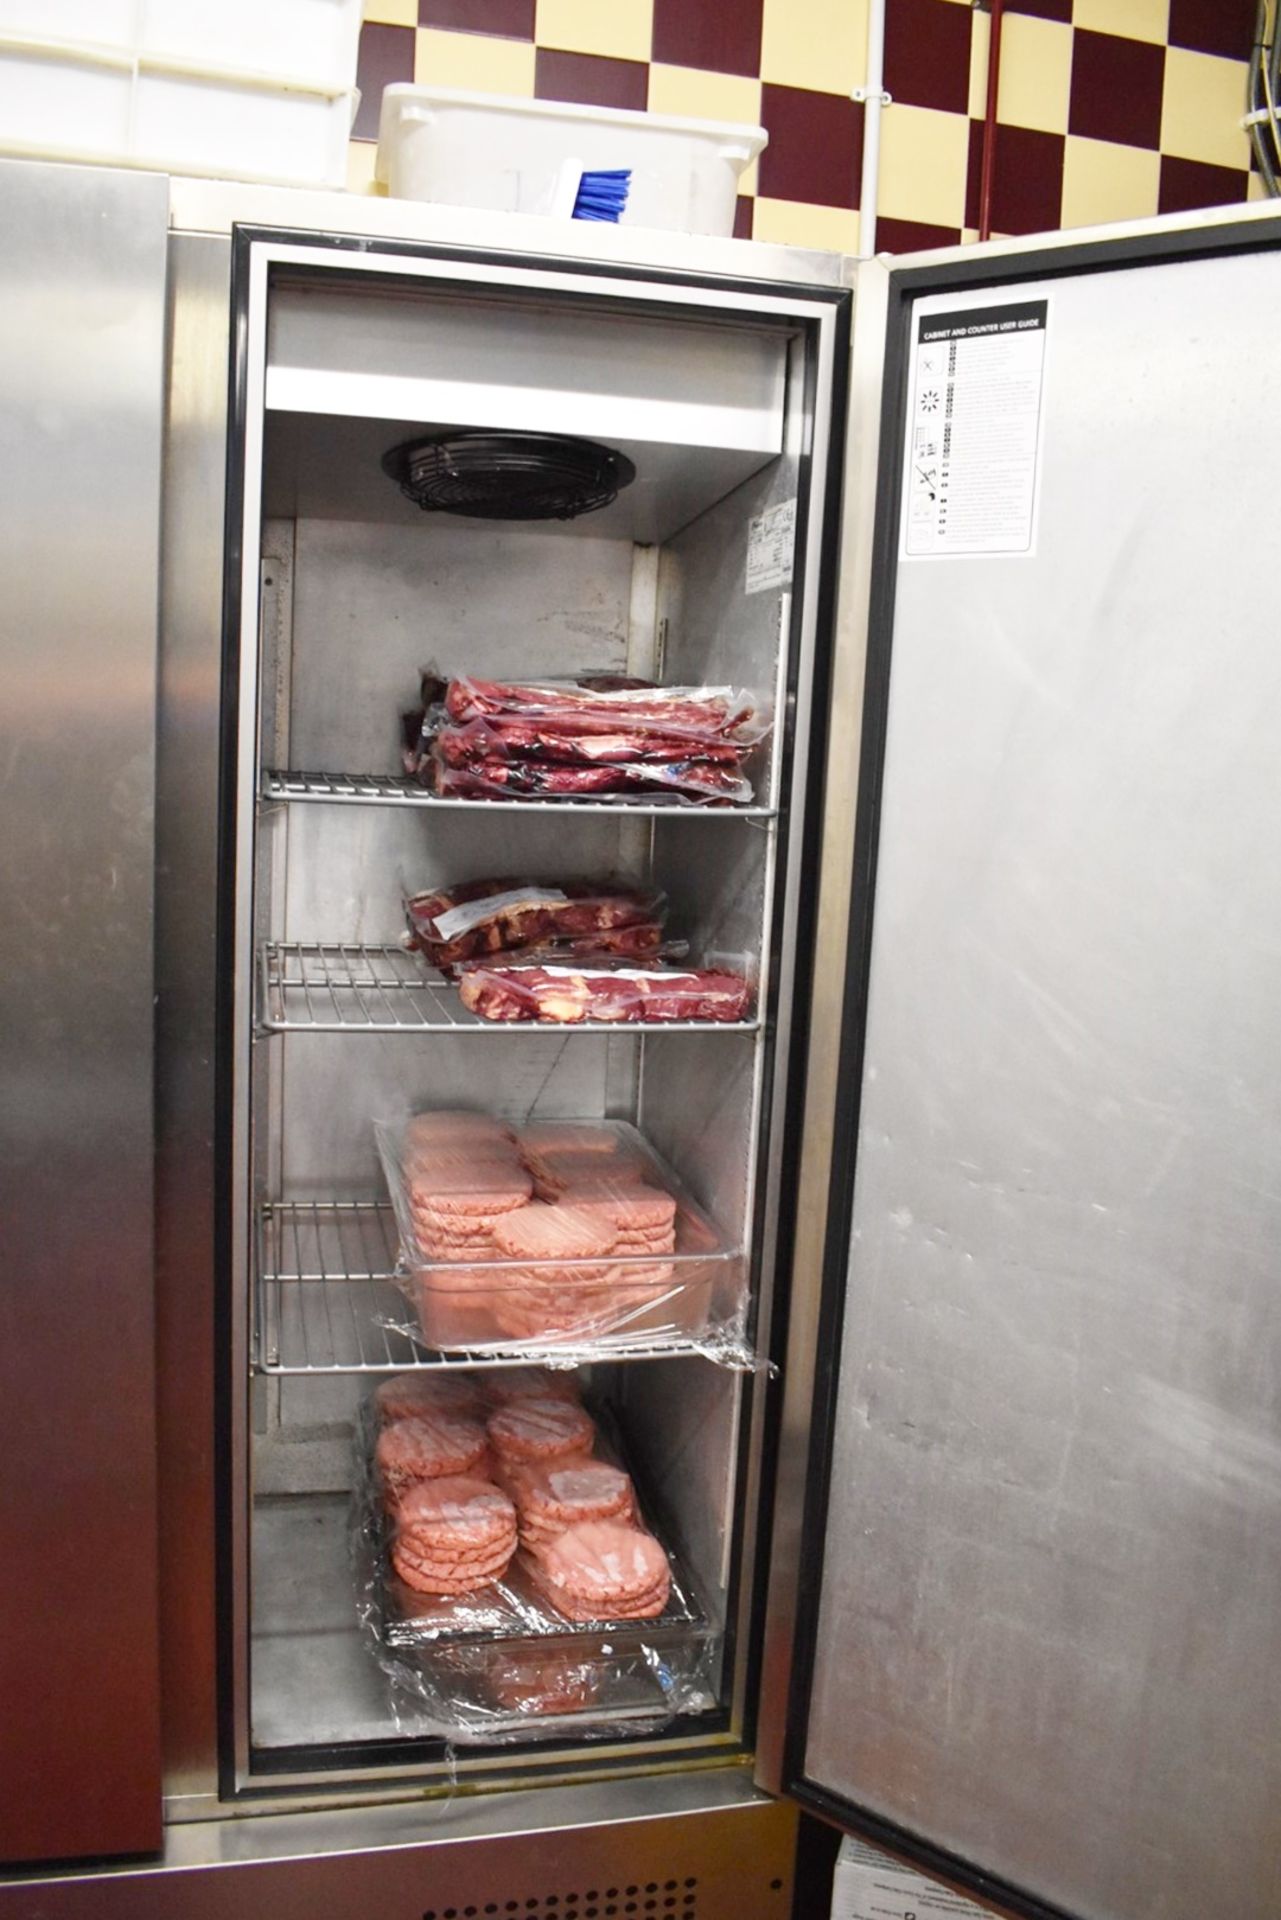 1 x Foster 800 Litre Double Door Meat Fridge With Stainless Steel Finish - Model FSL800M - Image 2 of 5